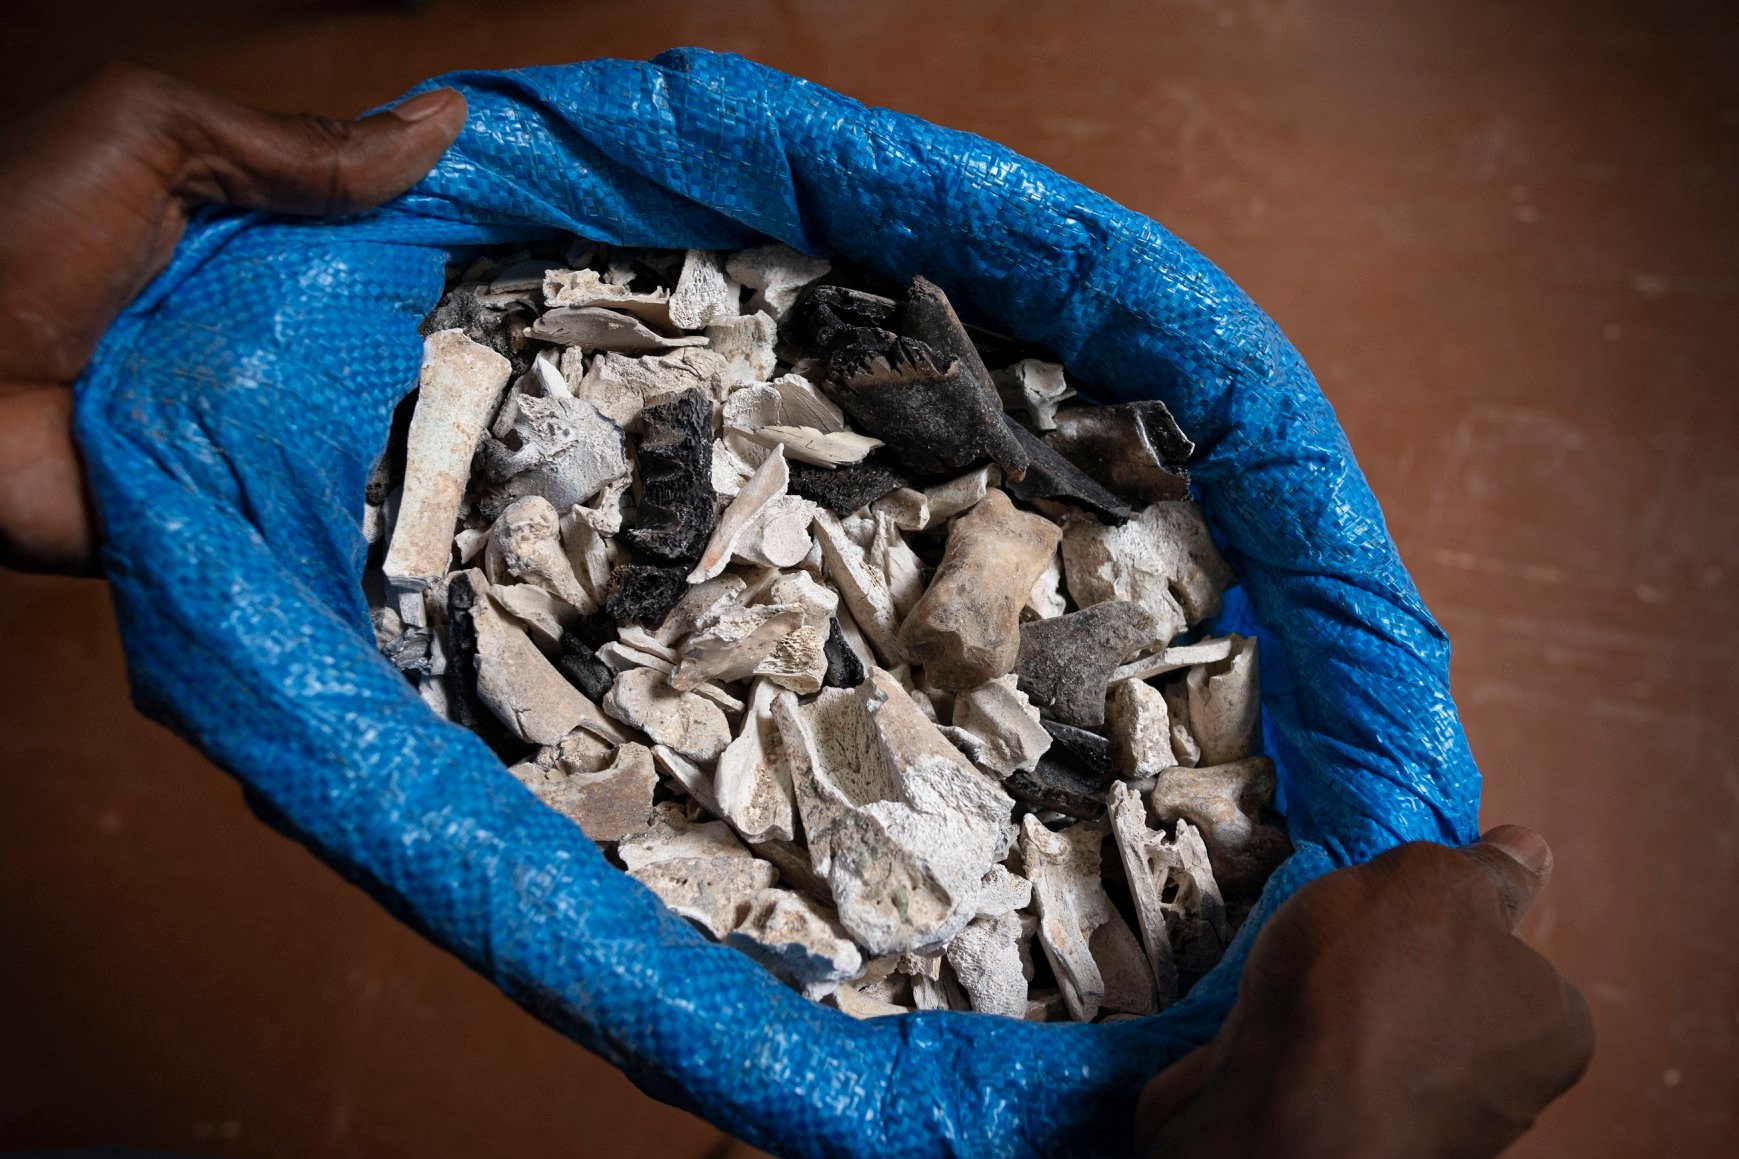 Cattle bones, cassava peels and other waste, which he buys from farmers across the country, are cleaned, fired in a vacuum-sealed furnace, soaked in an acidic solution, washed in distilled water, and then crushed into activated carbon.